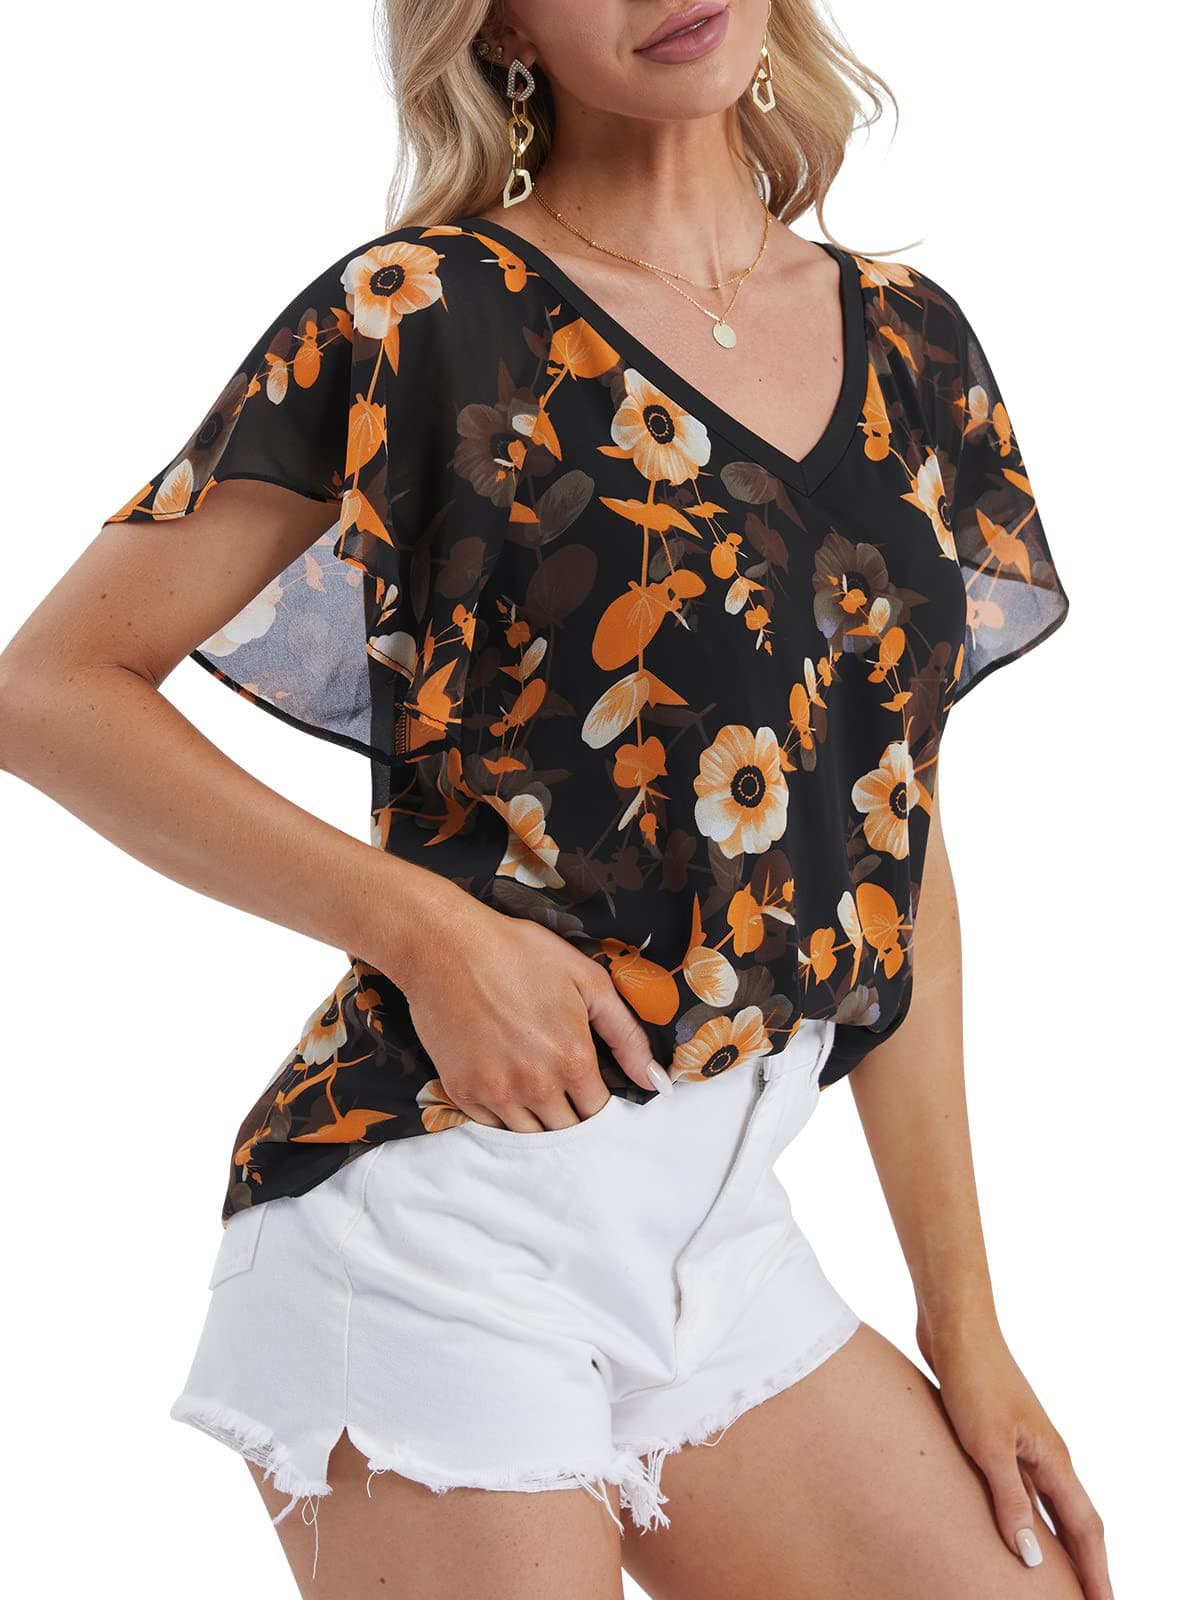 DJT Flare Ruffle Short Sleeve Black Floral Womens Summer Chiffon Tops Casual V Neck Flowy Top Blouses Shirts Media 1 of 4